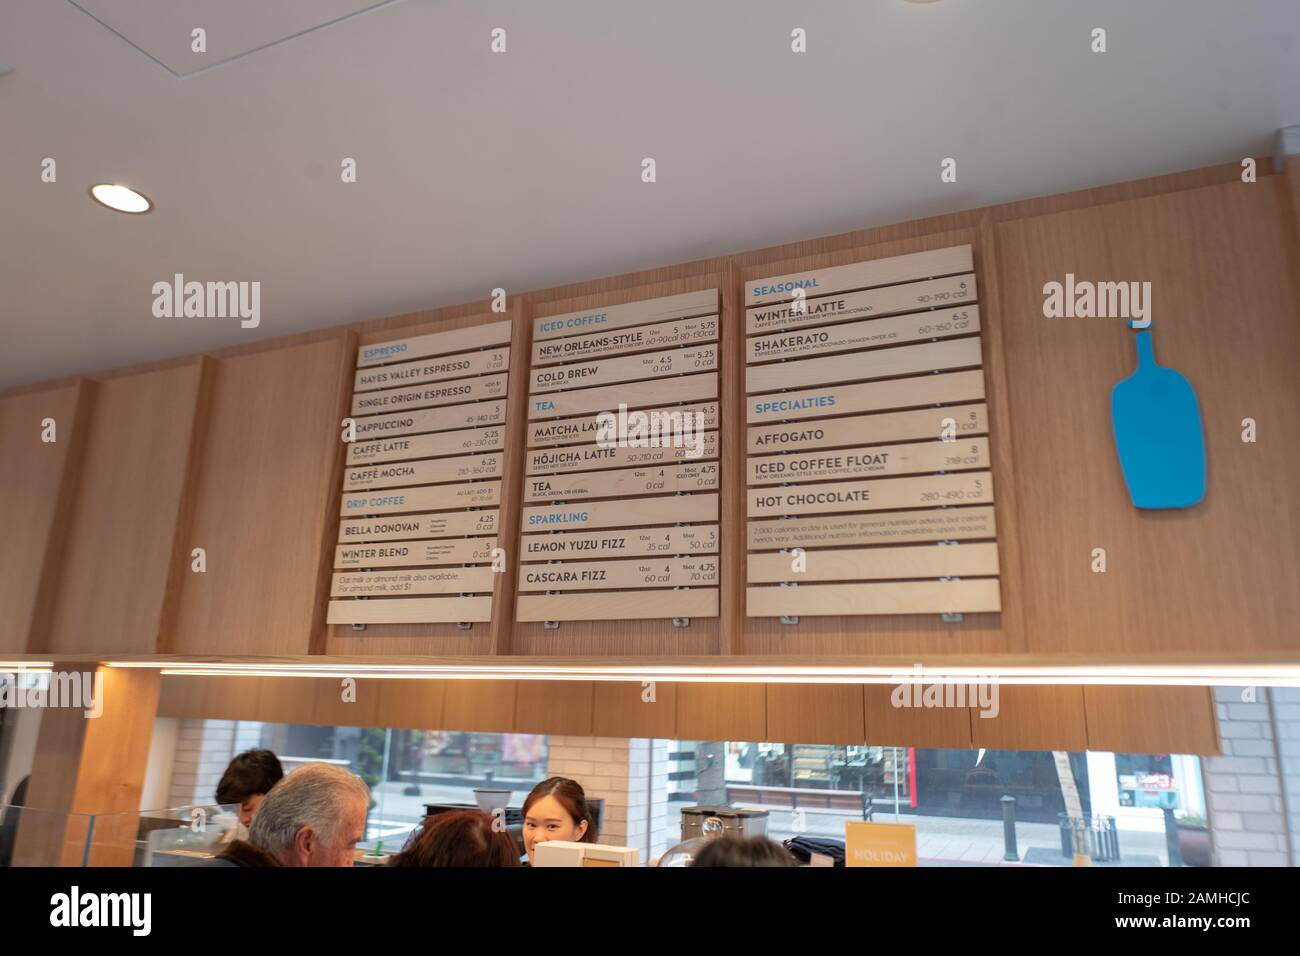 https://c8.alamy.com/comp/2AMHCJC/interior-menu-board-at-newly-opened-blue-bottle-coffee-cafe-at-the-santana-row-shopping-mall-in-the-silicon-valley-san-jose-california-december-12-2019-2AMHCJC.jpg